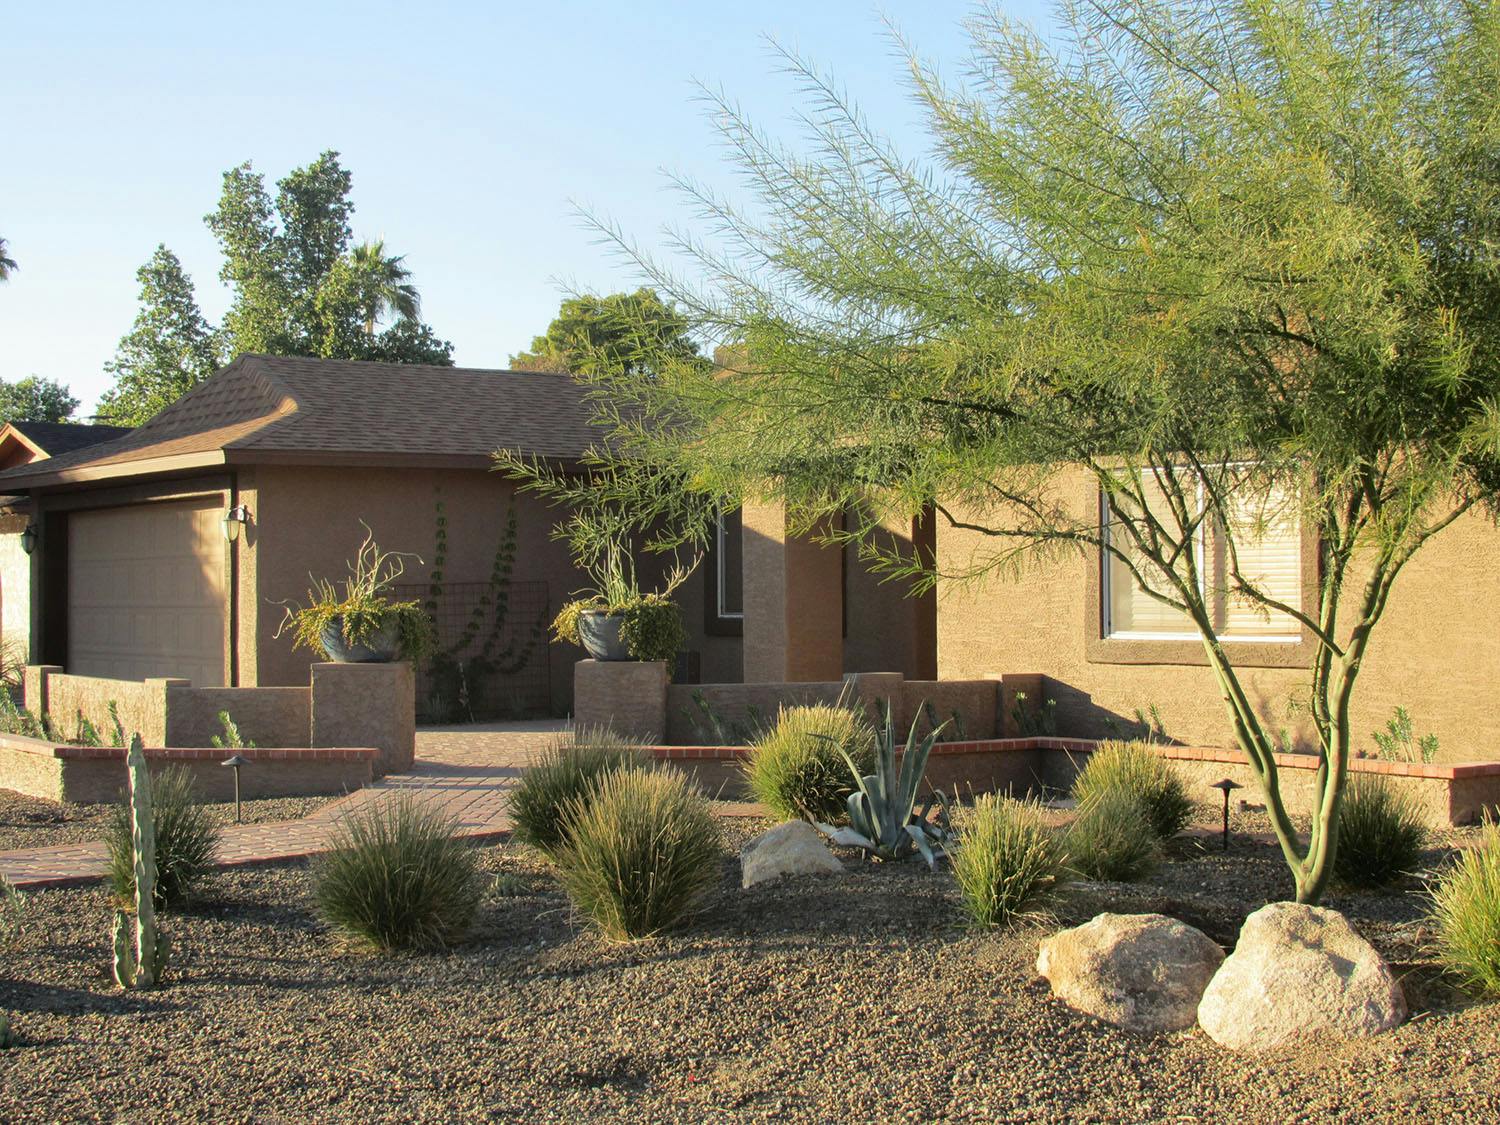 Xeriscaped front yard. Landscape Designer: Sara Jacoby